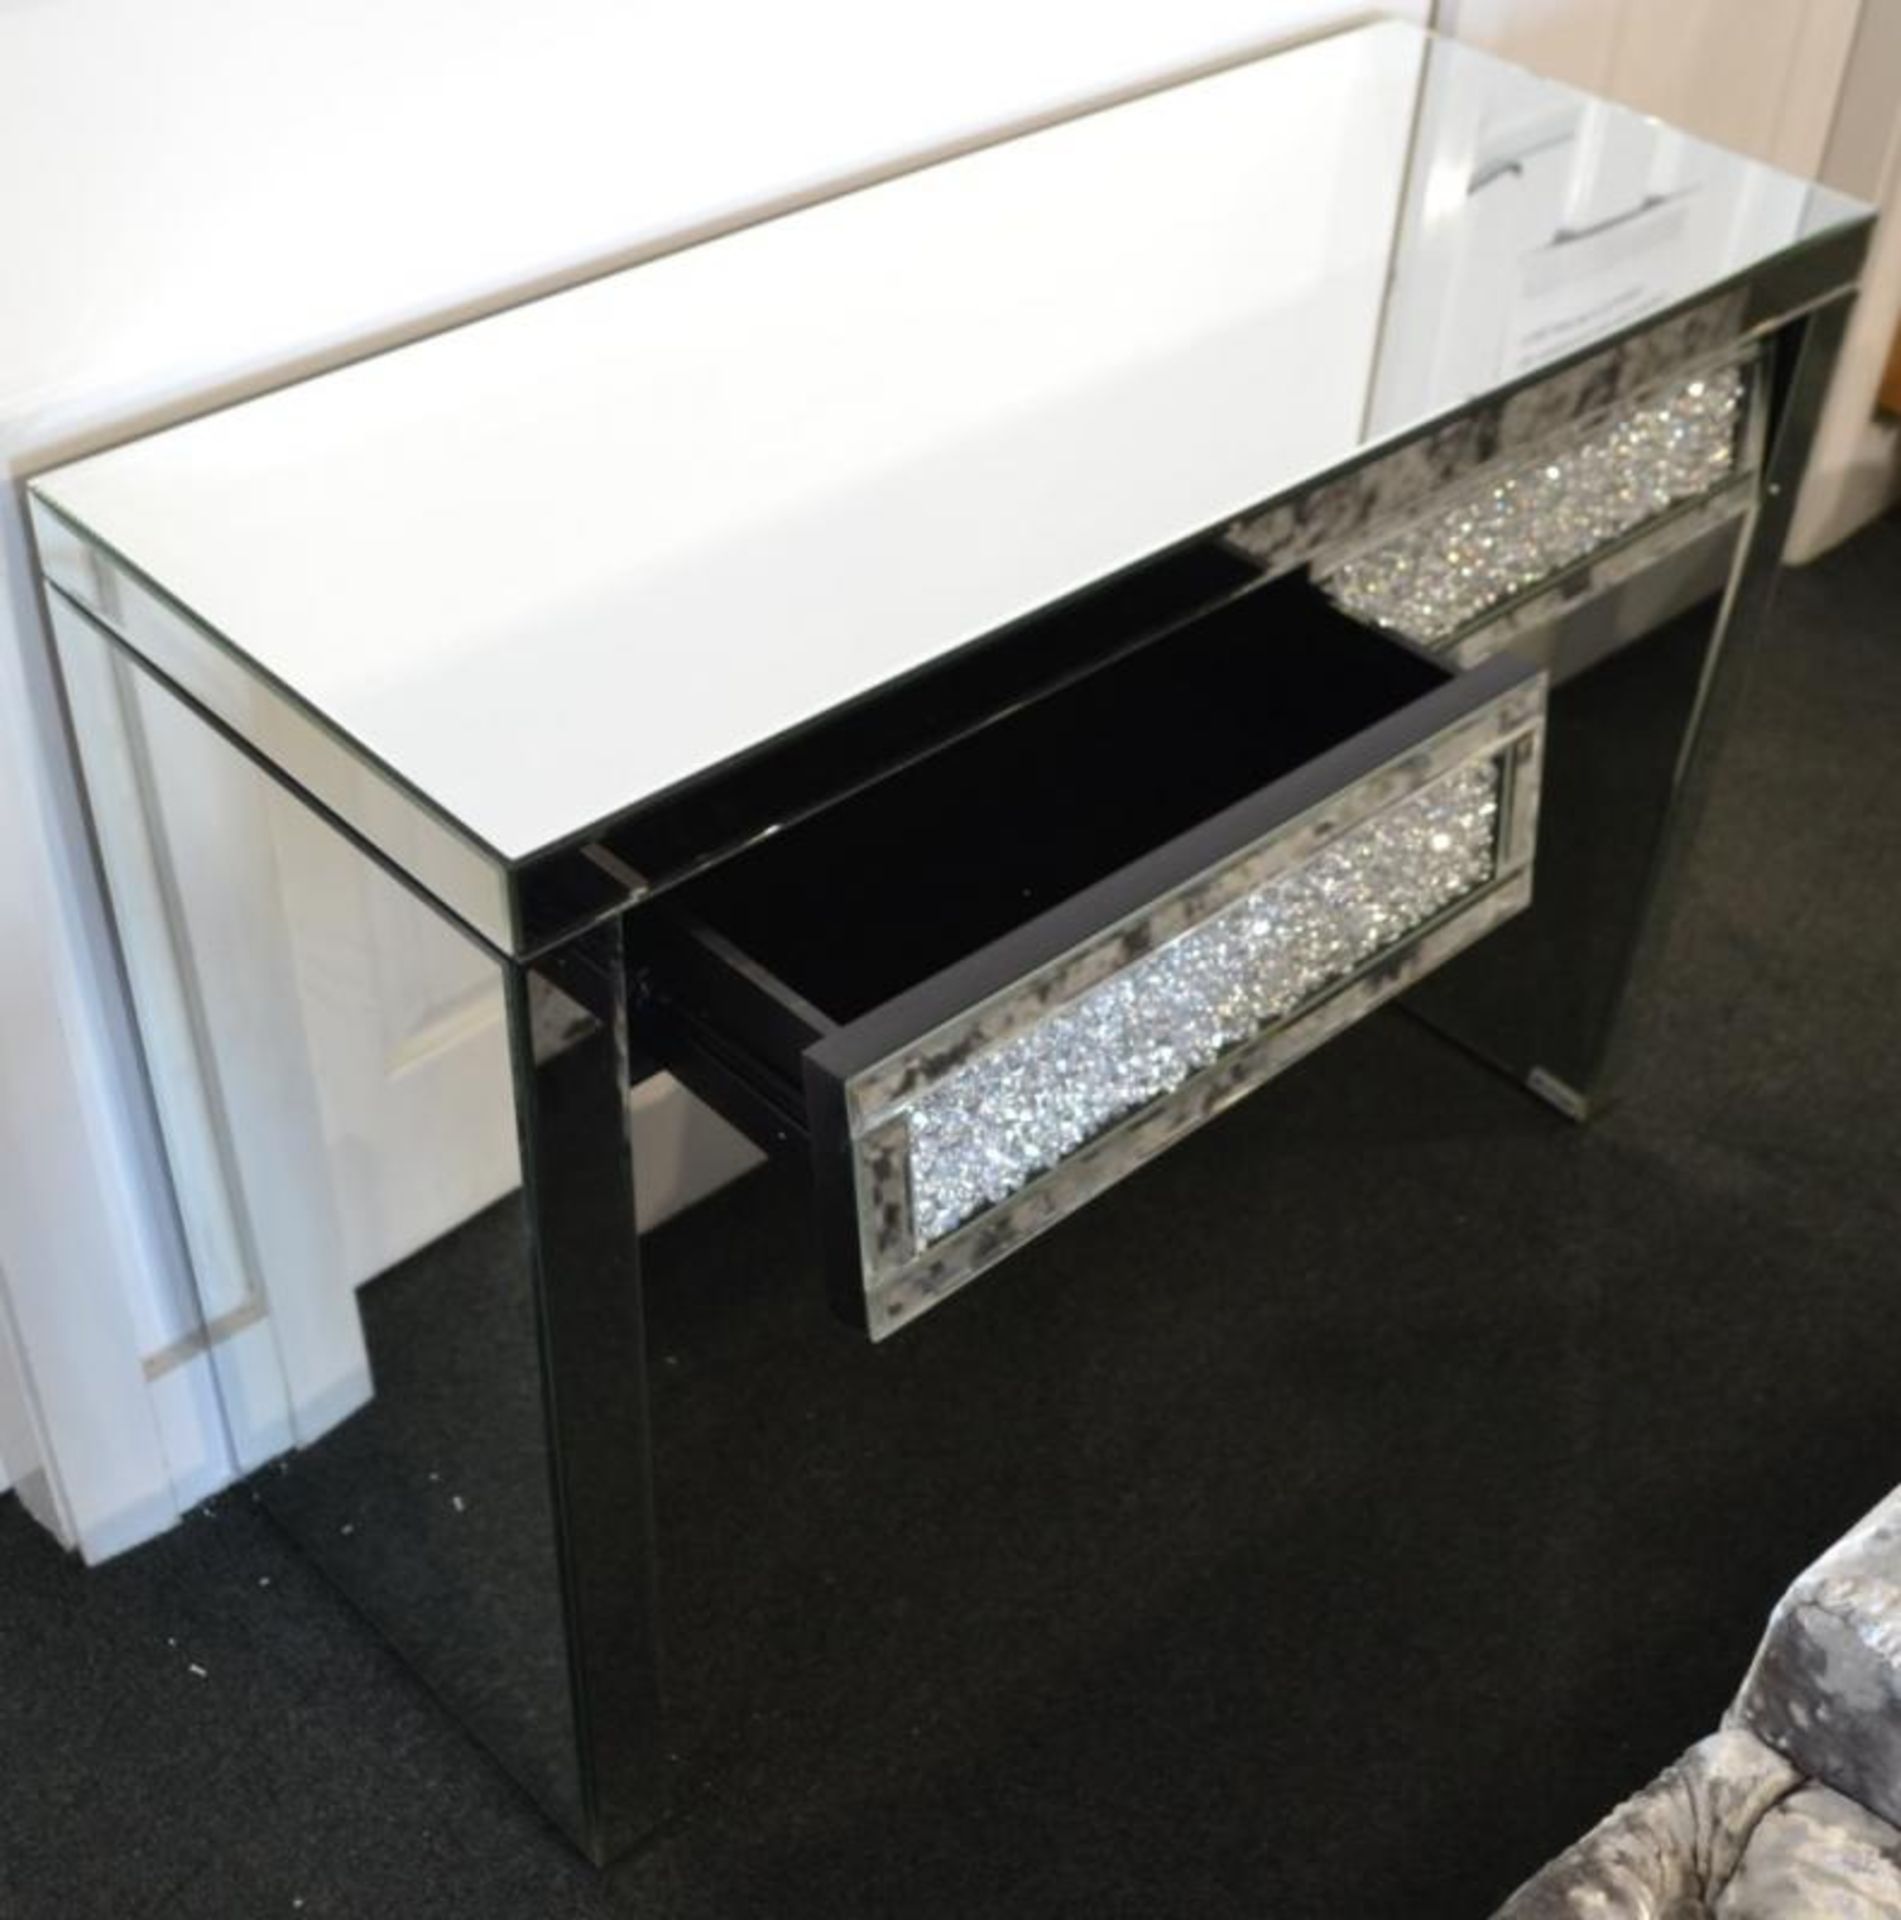 1 x Double Draw Mirrored Dressing Table. A beautiful mirrored dressing table with crystal encrusted - Image 4 of 4